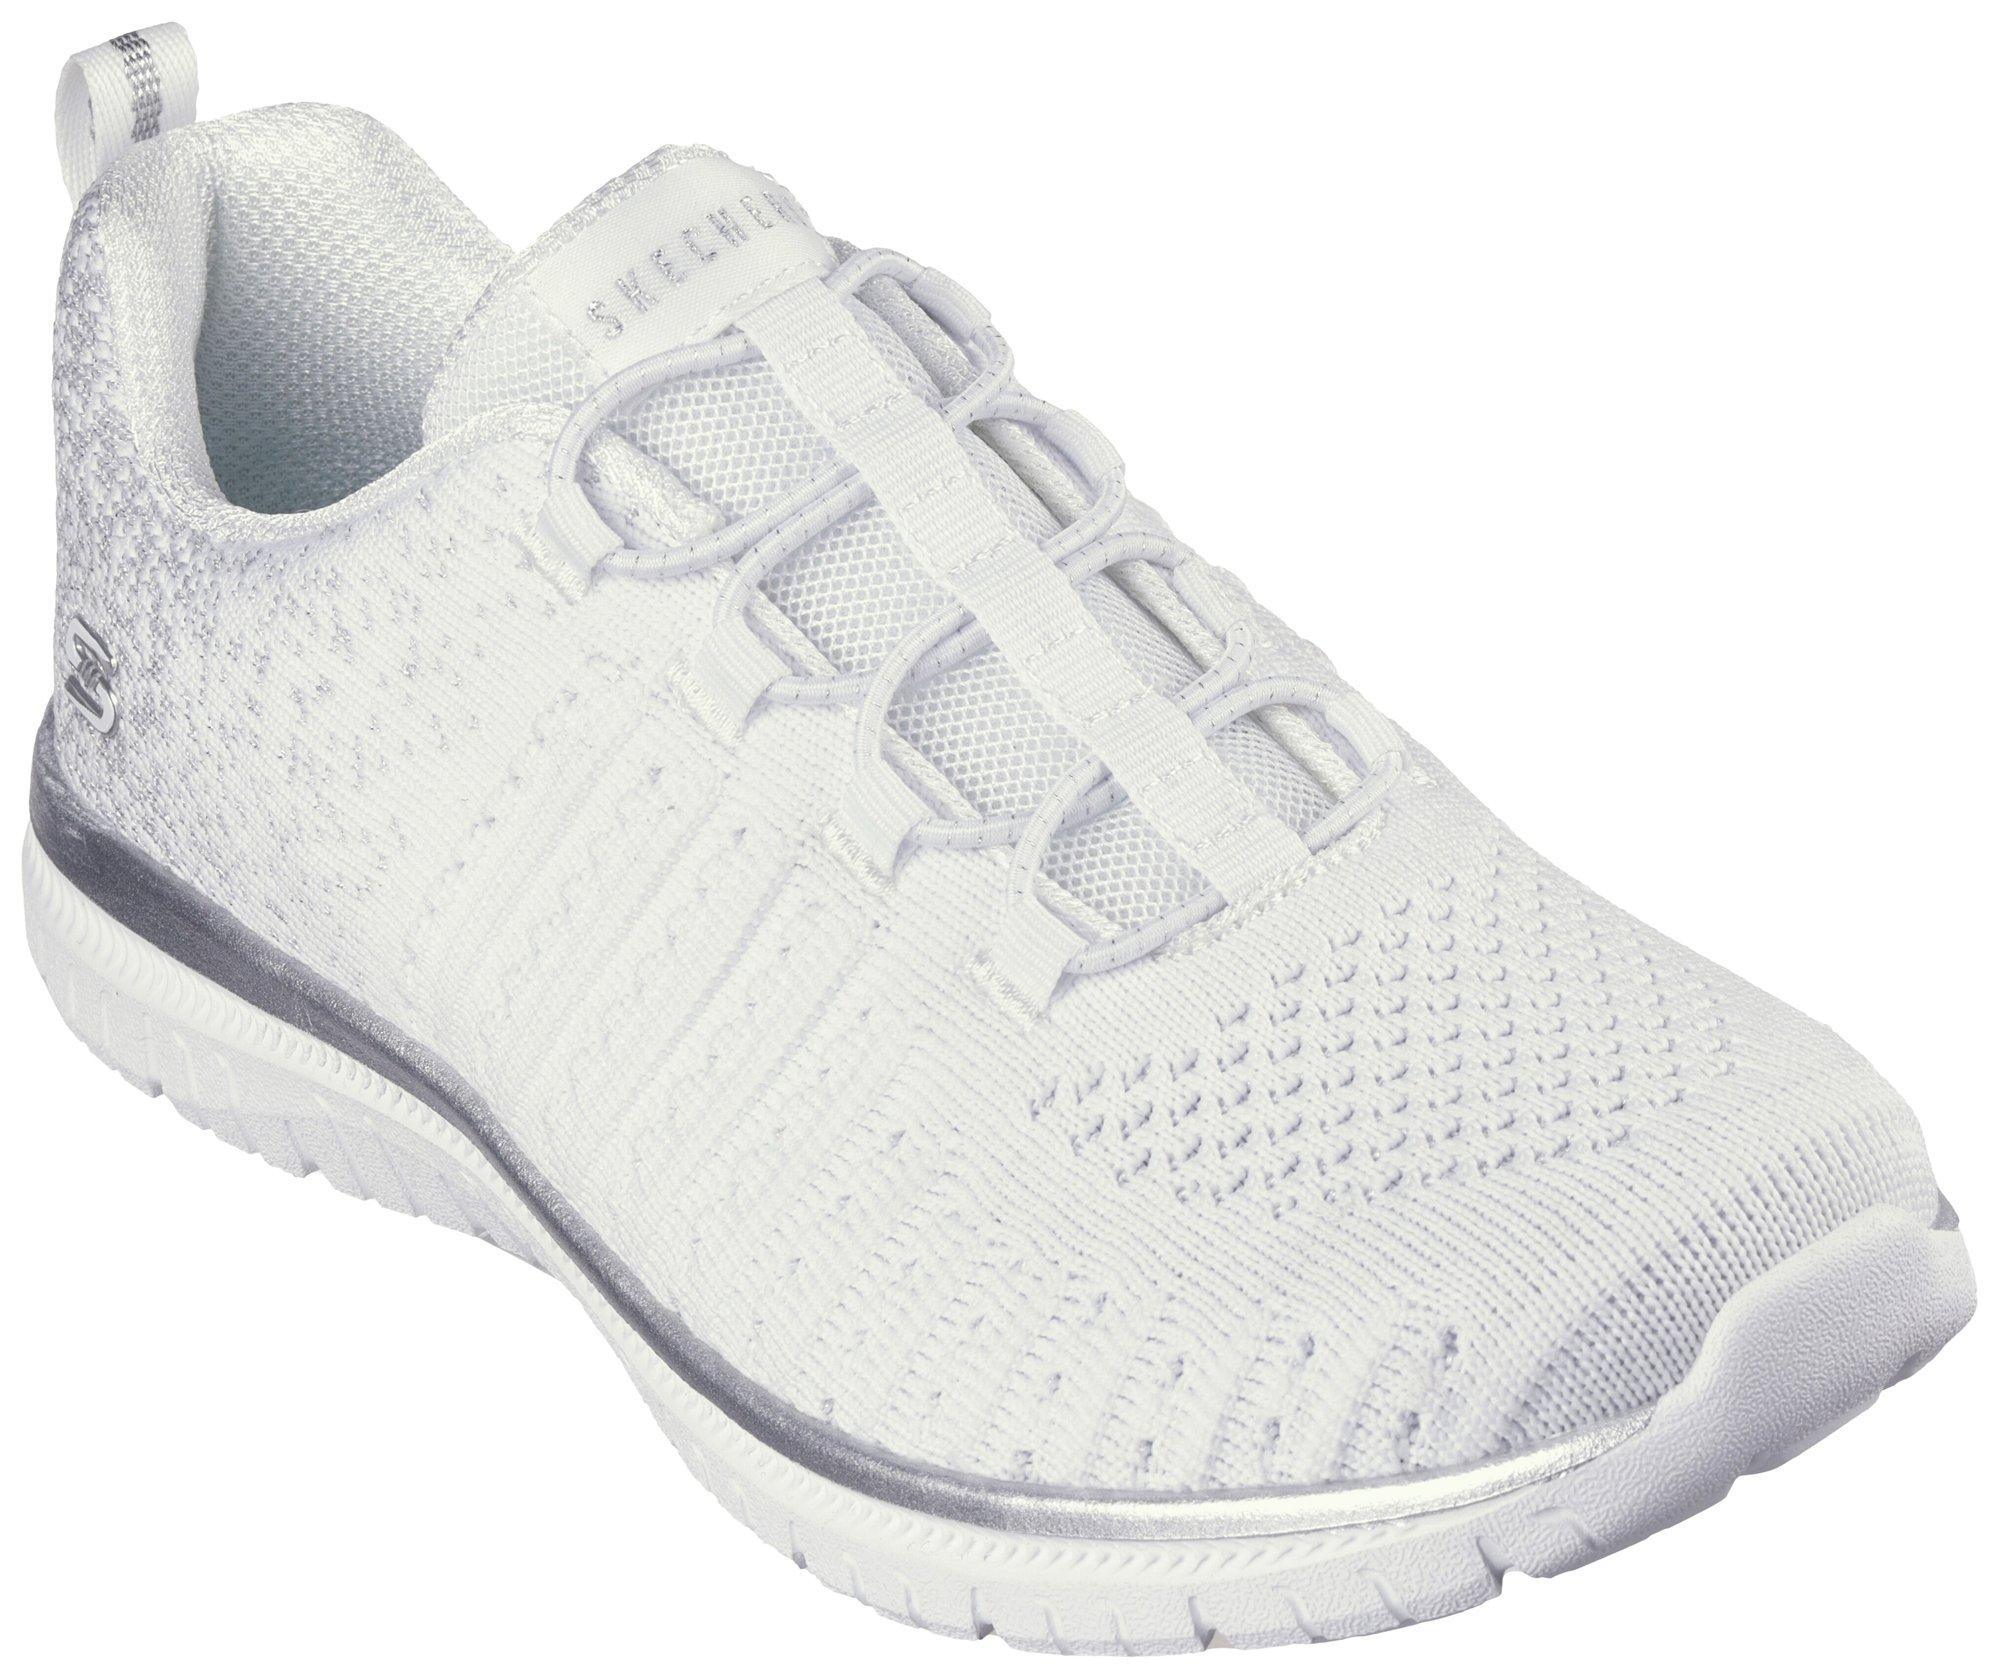 Womens Virtue Lucent Athletic Shoes